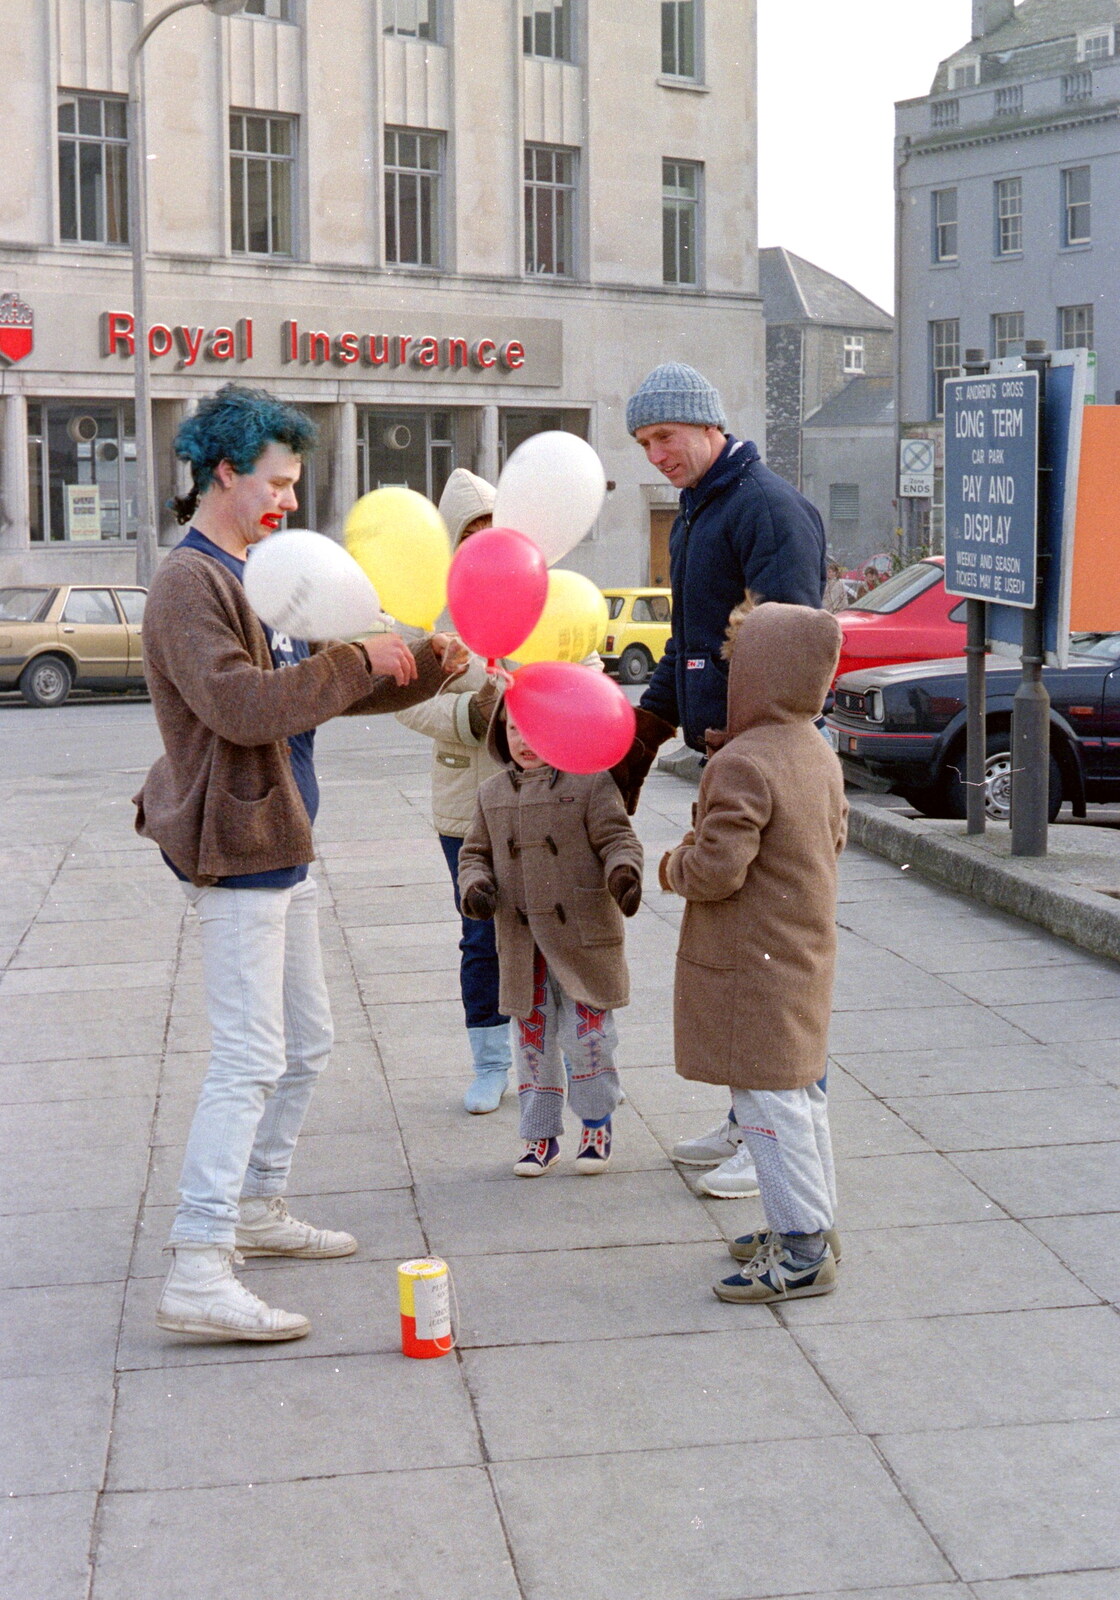 More balloons are handed out from Uni: PPSU "Jazz" RAG Street Parade, Plymouth, Devon - 17th February 1986